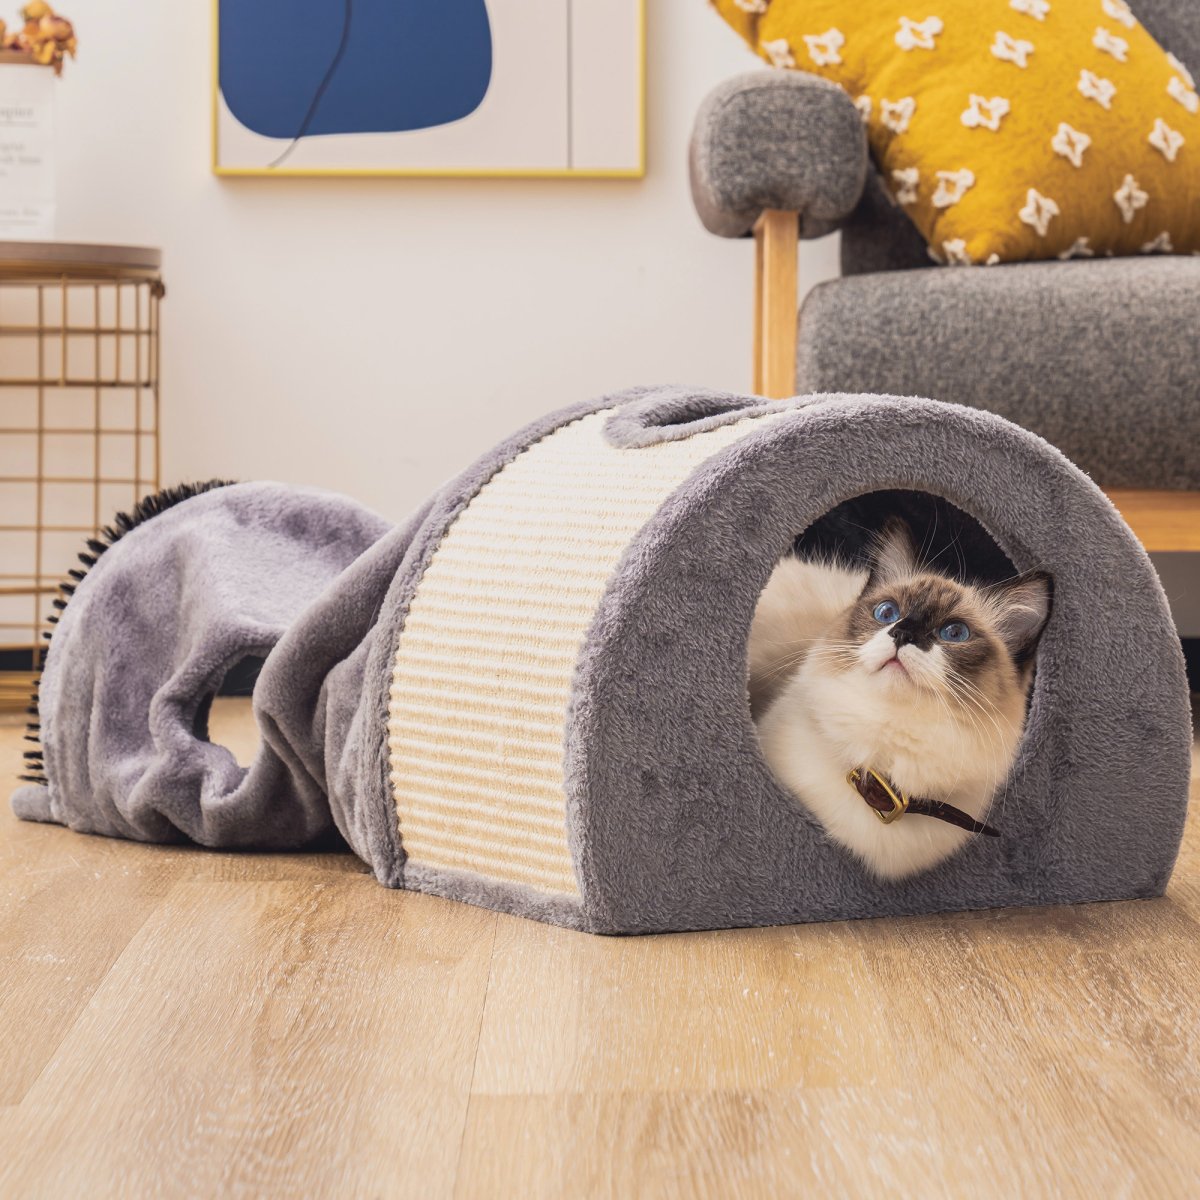 Mewoofun Cat Tunnel Cat Bed Toys Soft Comfortable Multifunction - Taplike